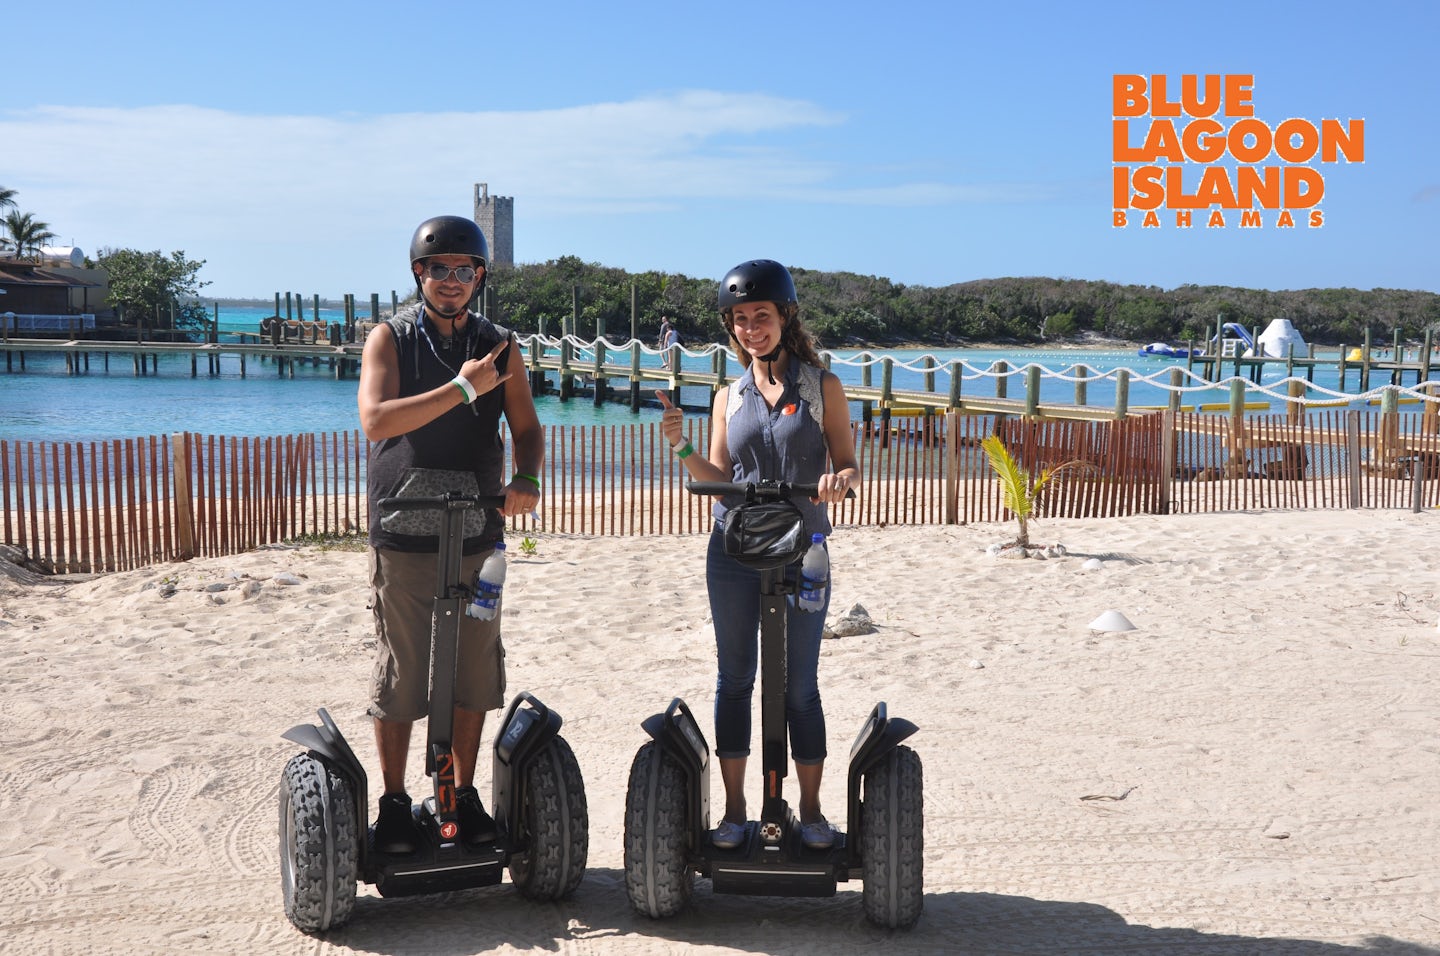 Segway in the blue lagoon